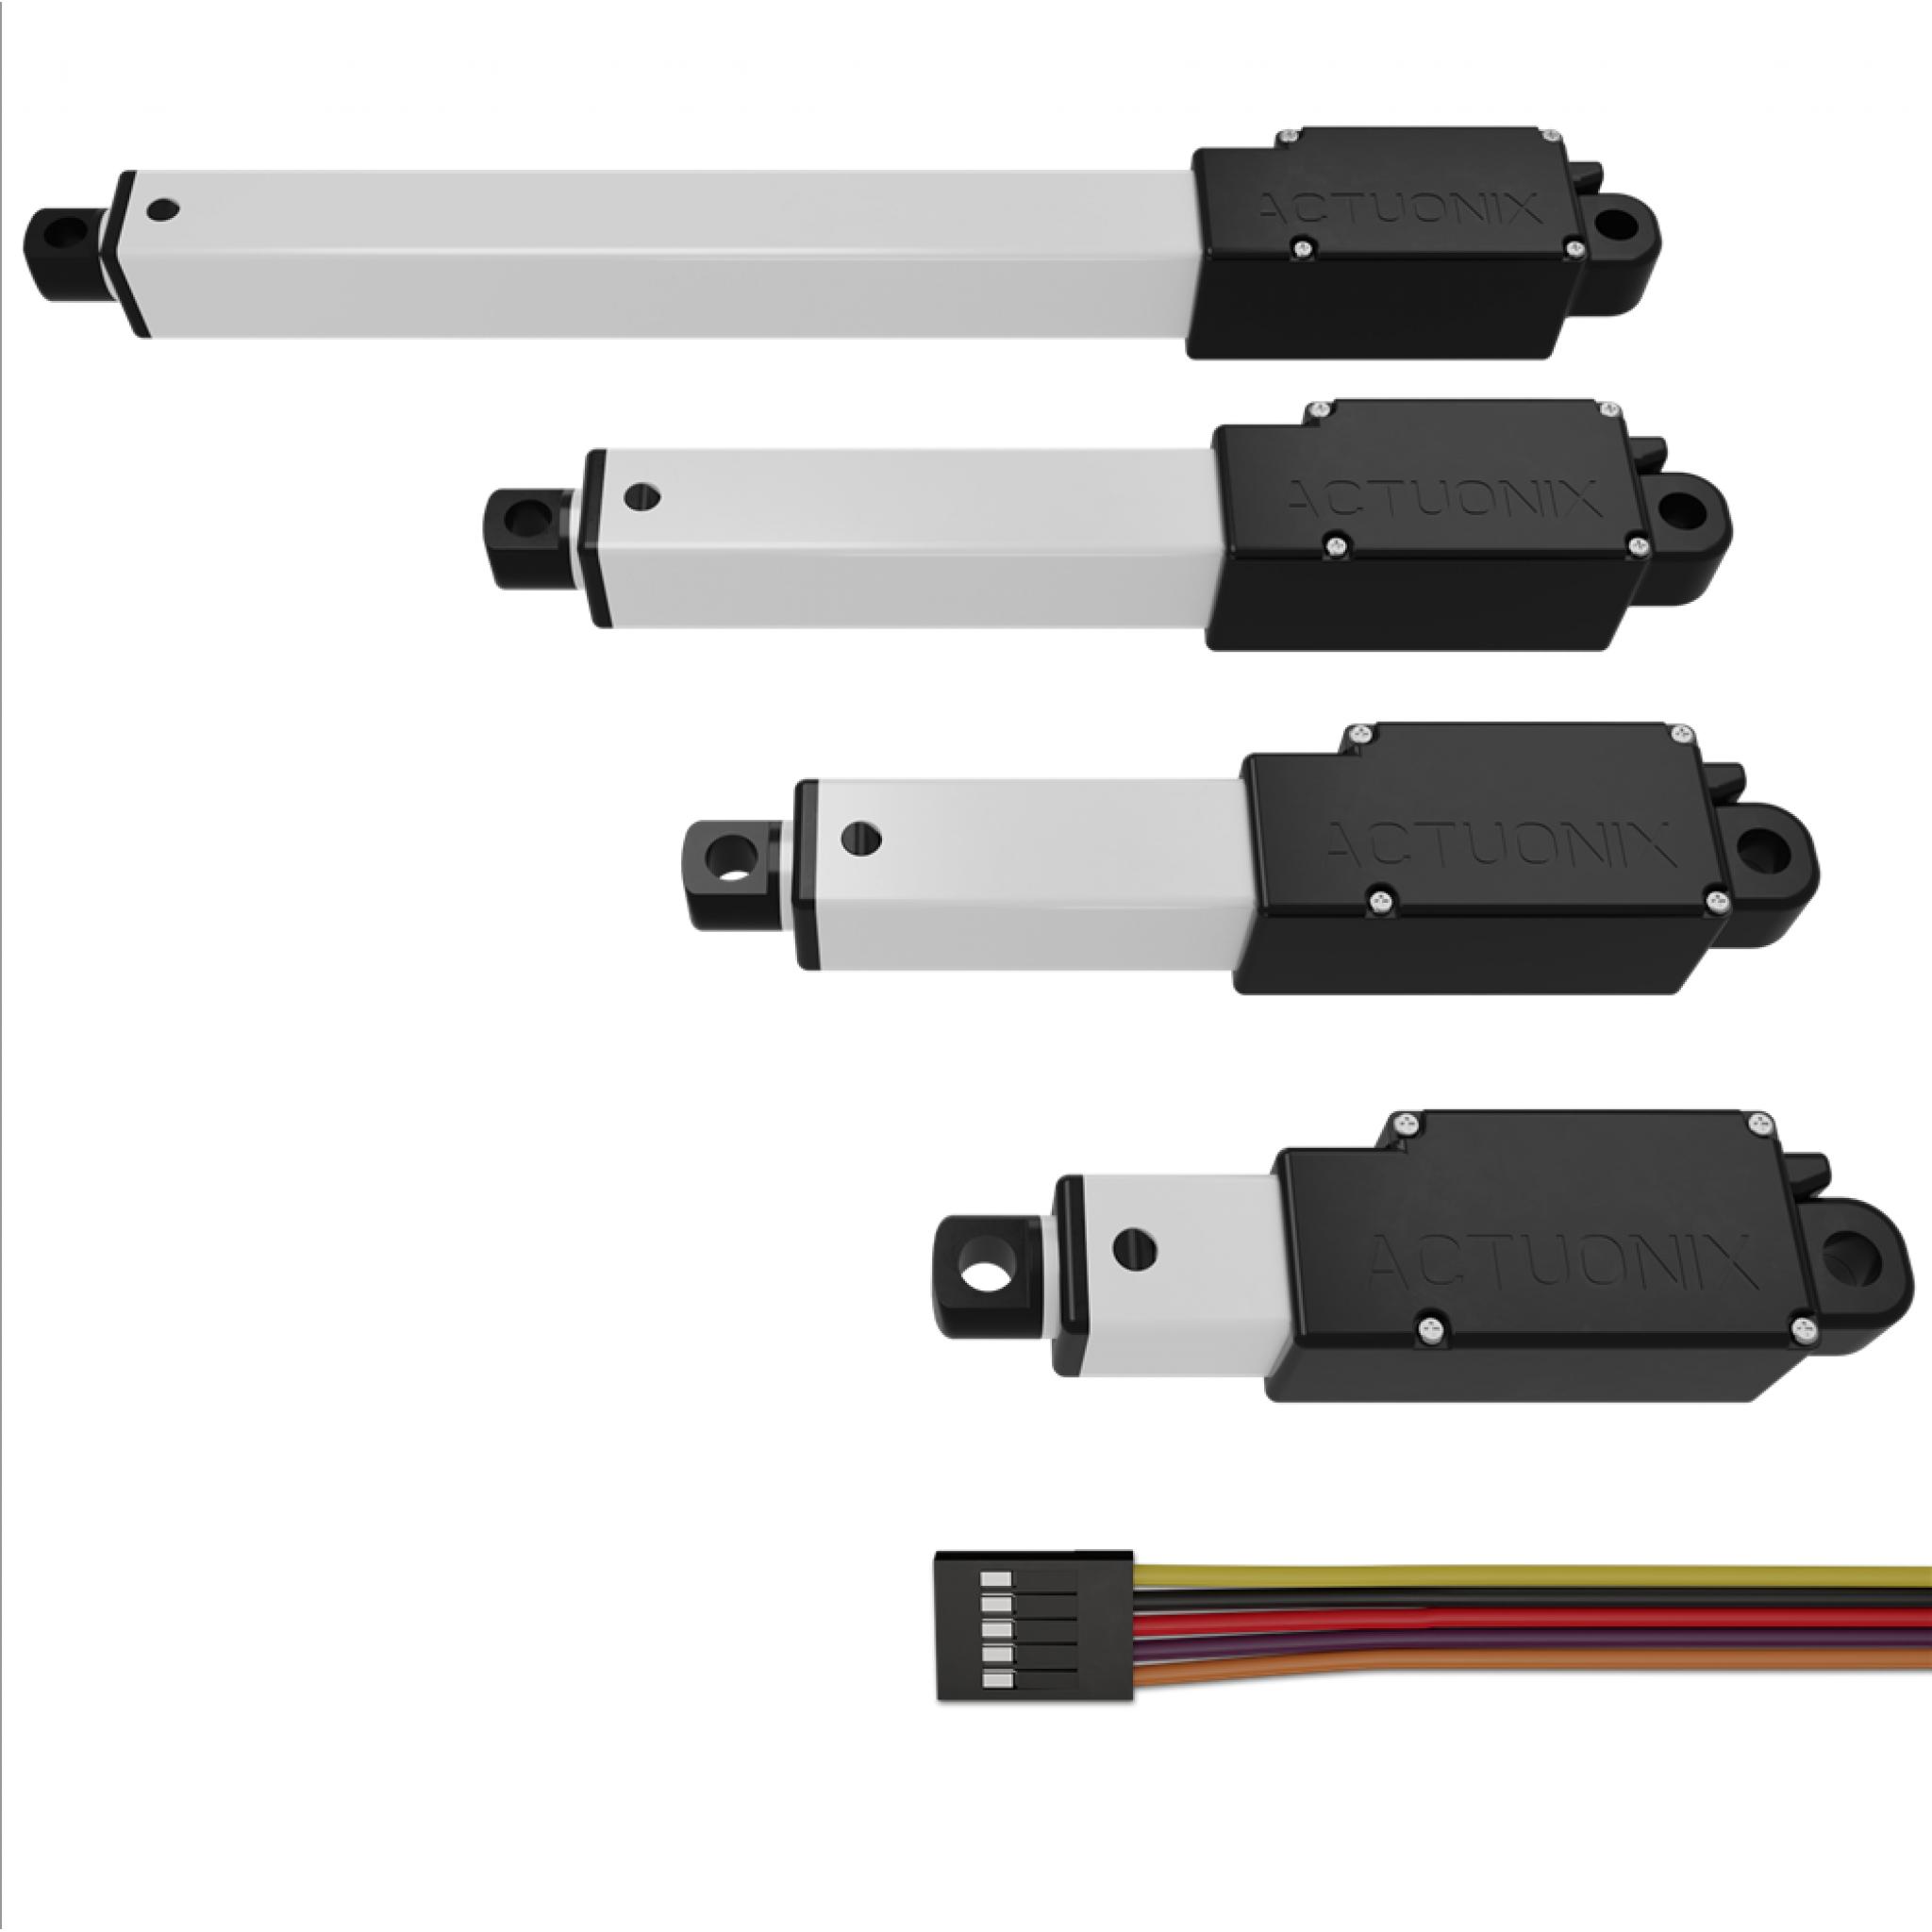 L P Micro Linear Actuator With Position Feedback